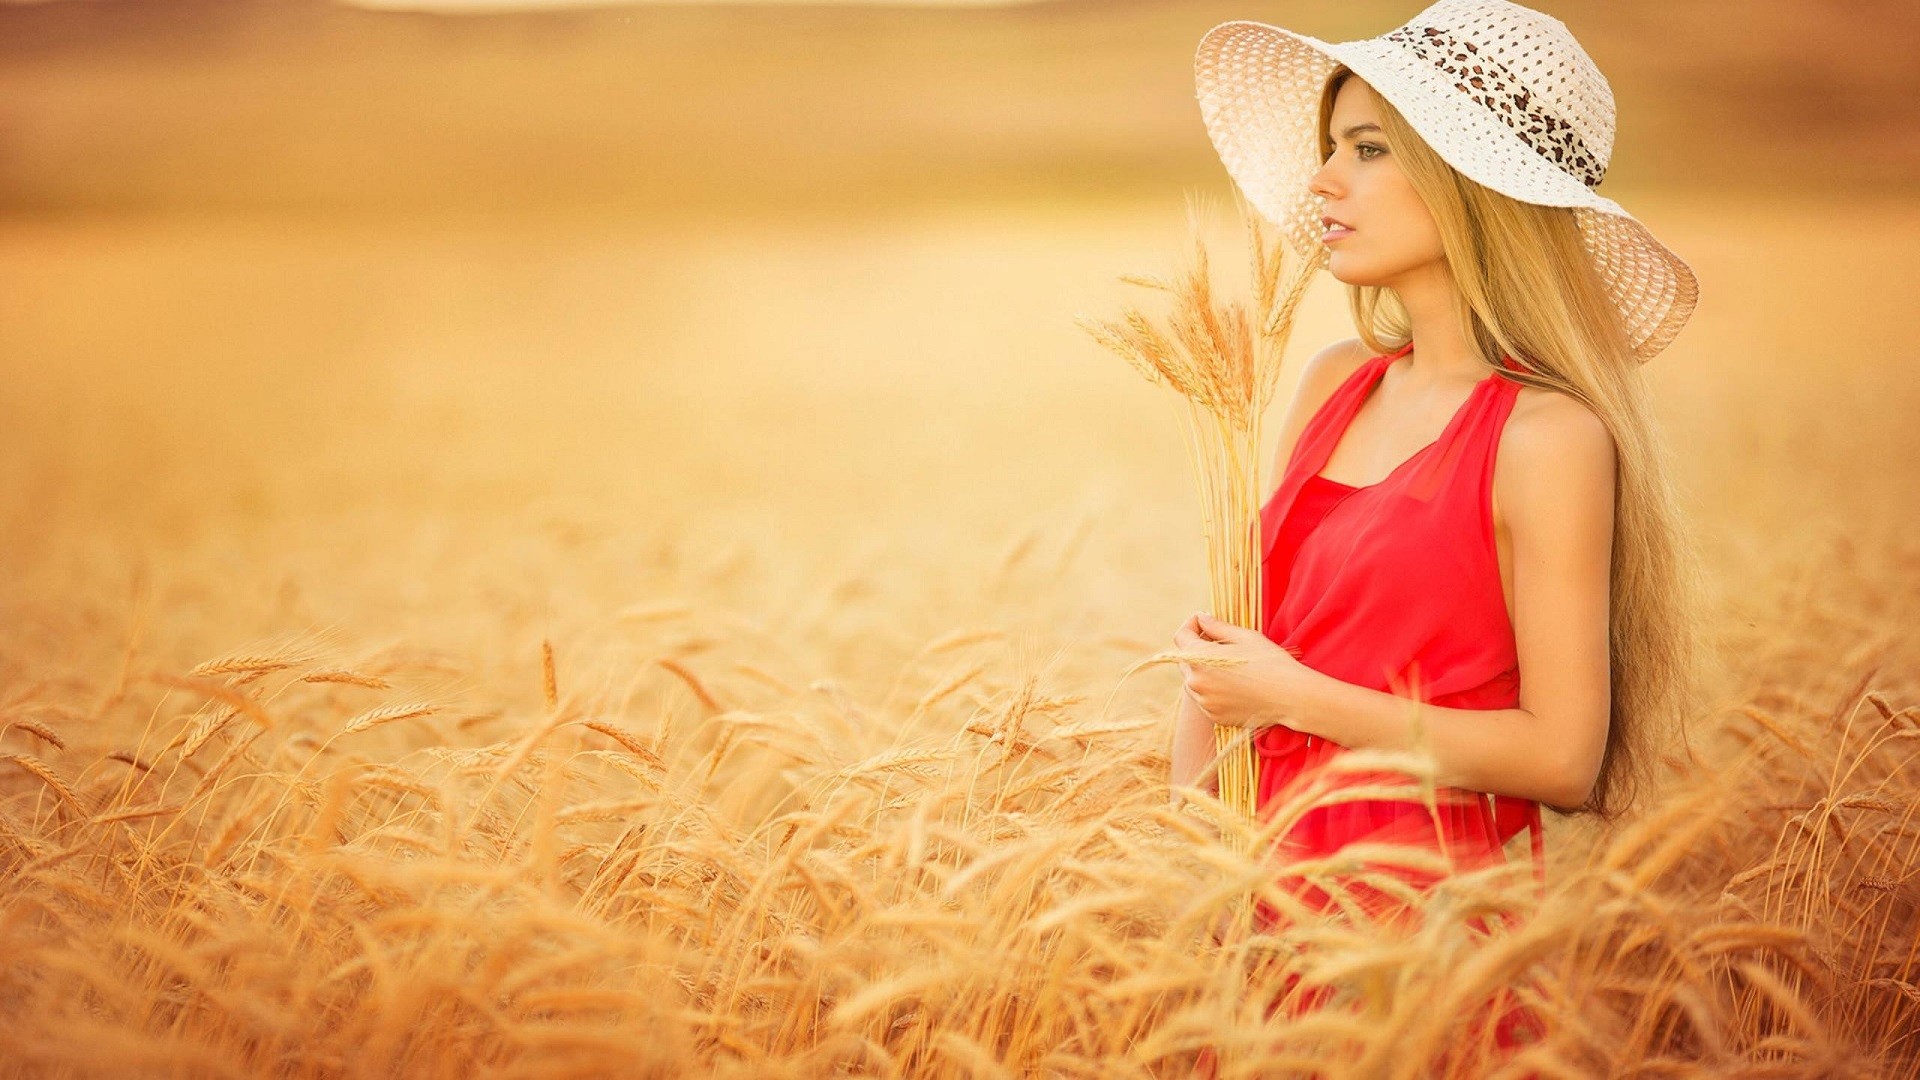 People 1920x1080 women blonde hat women outdoors wheat farm plants red dress long hair dress Agro (Plants) face profile women with hats field red clothing